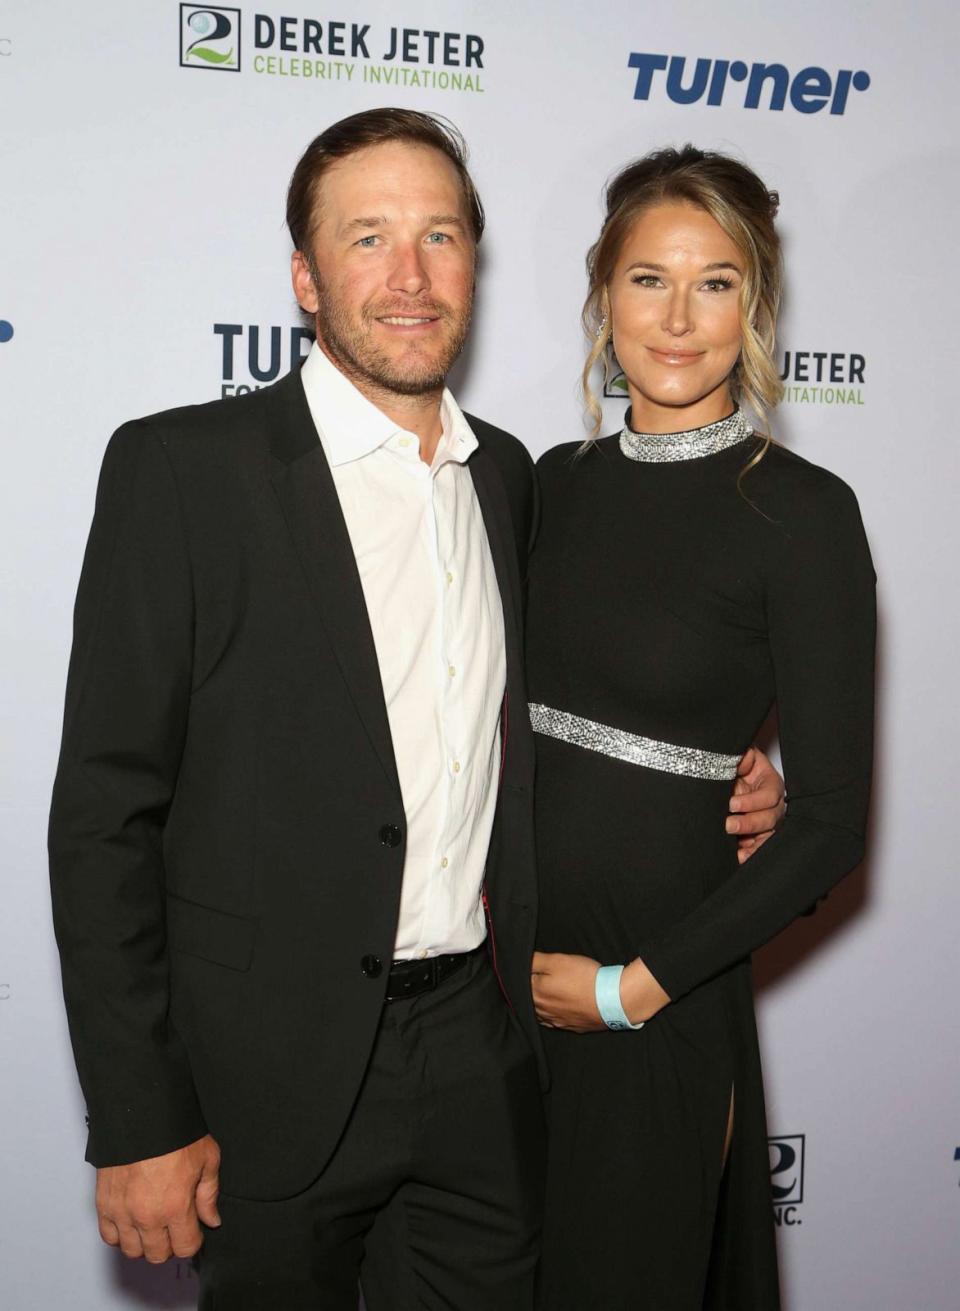 PHOTO: Bode Miller, left, and his wife Morgan Beck, attend the 2018 Derek Jeter Celebrity Invitational Gala at the Aria Resort & Casino, April 19, 2018, in Las Vegas. (Gabe Ginsberg/Getty Images)